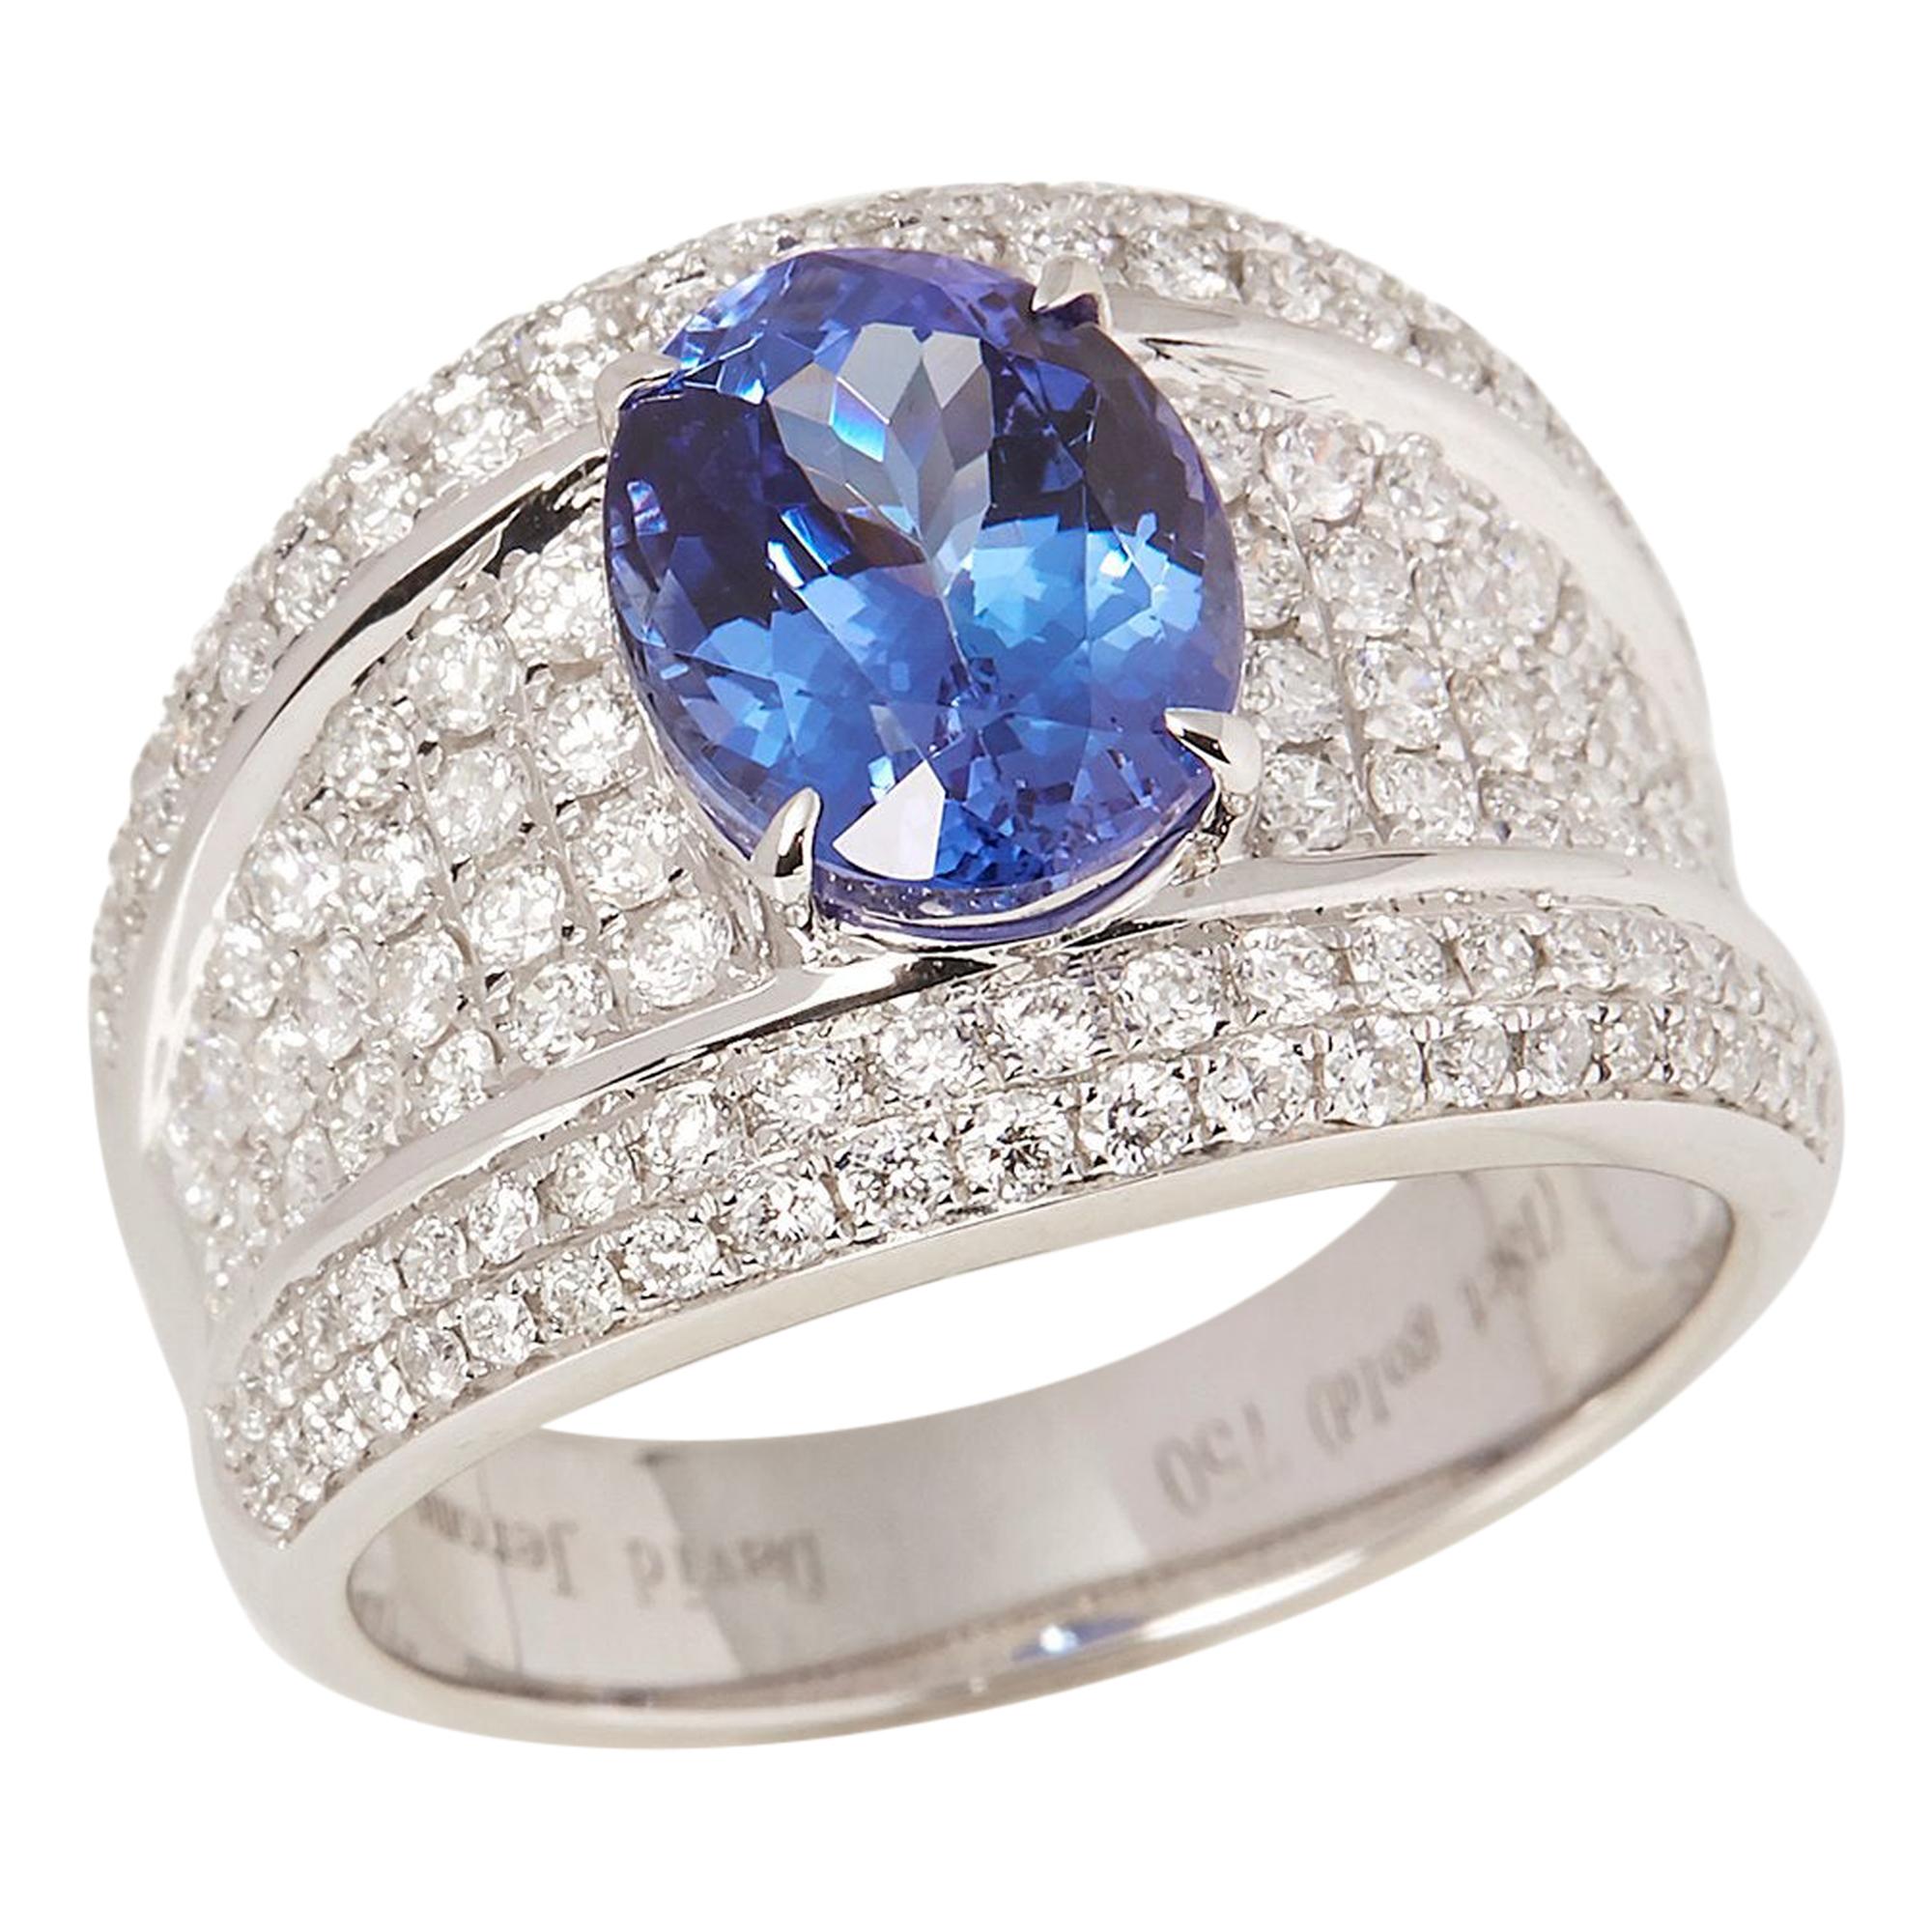 Certified 2.87ct Oval Cut Tanzanite and Diamond 18ct gold Ring